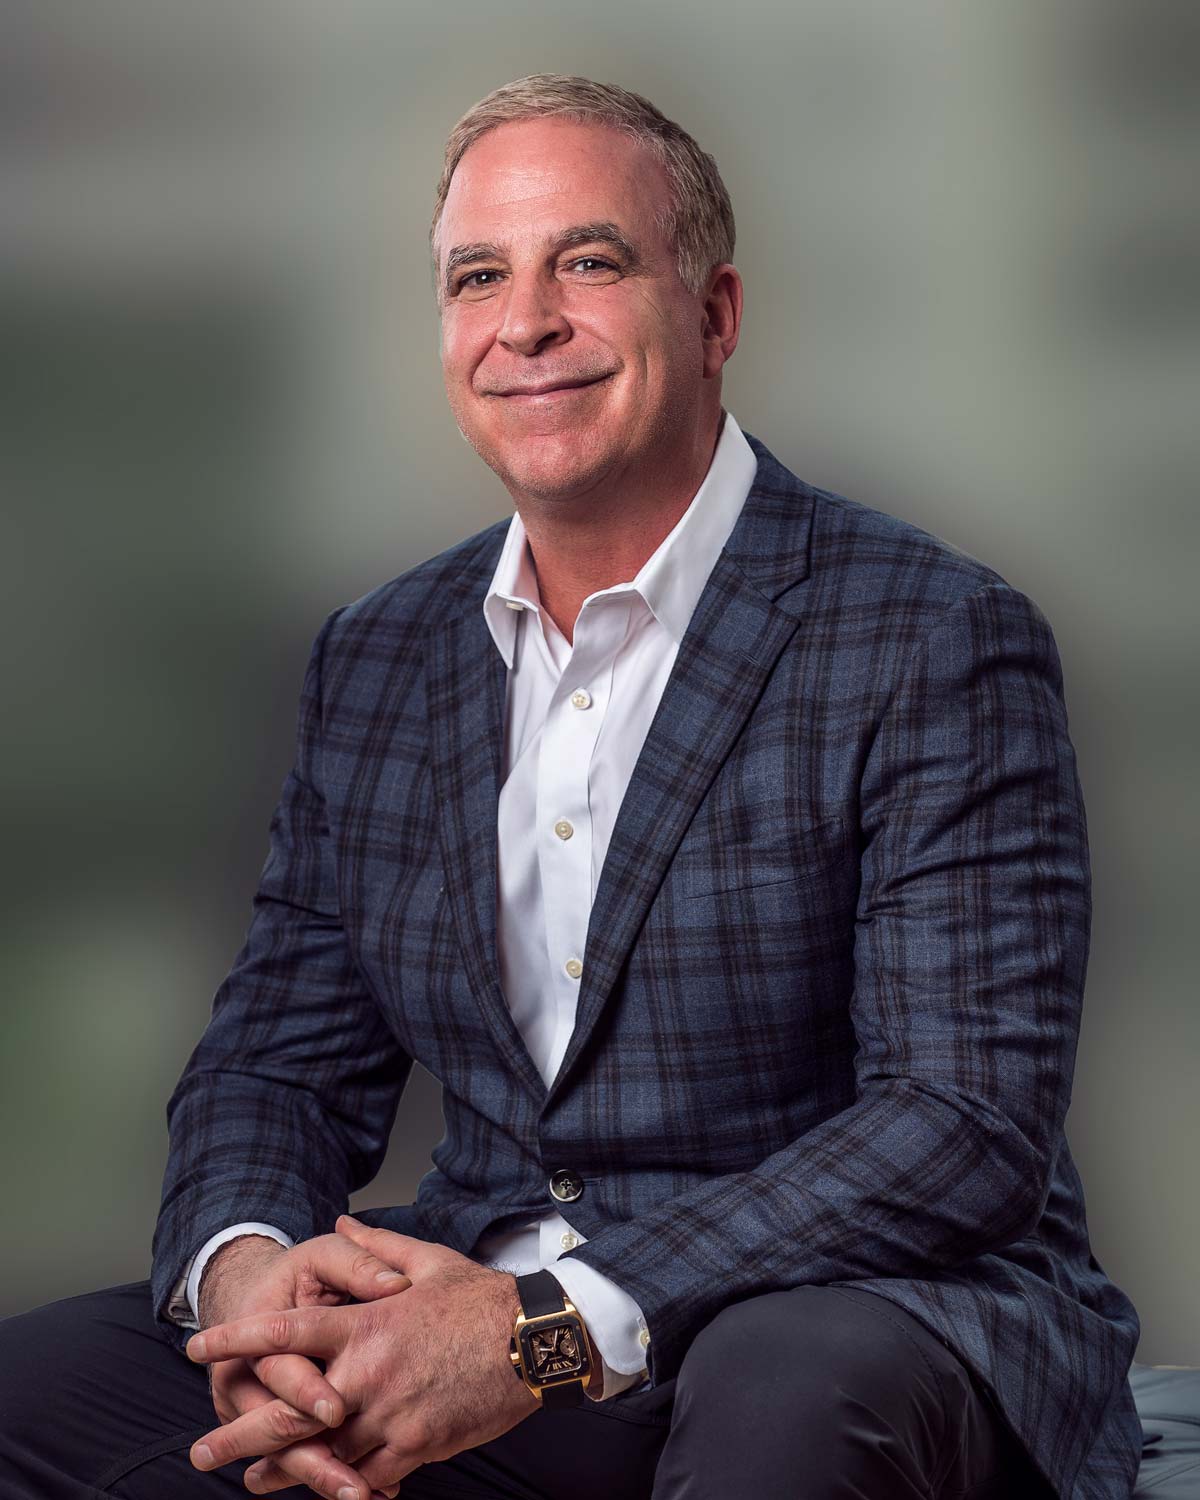 The professional headshot of James Dondero, founder and principal of NexPoint